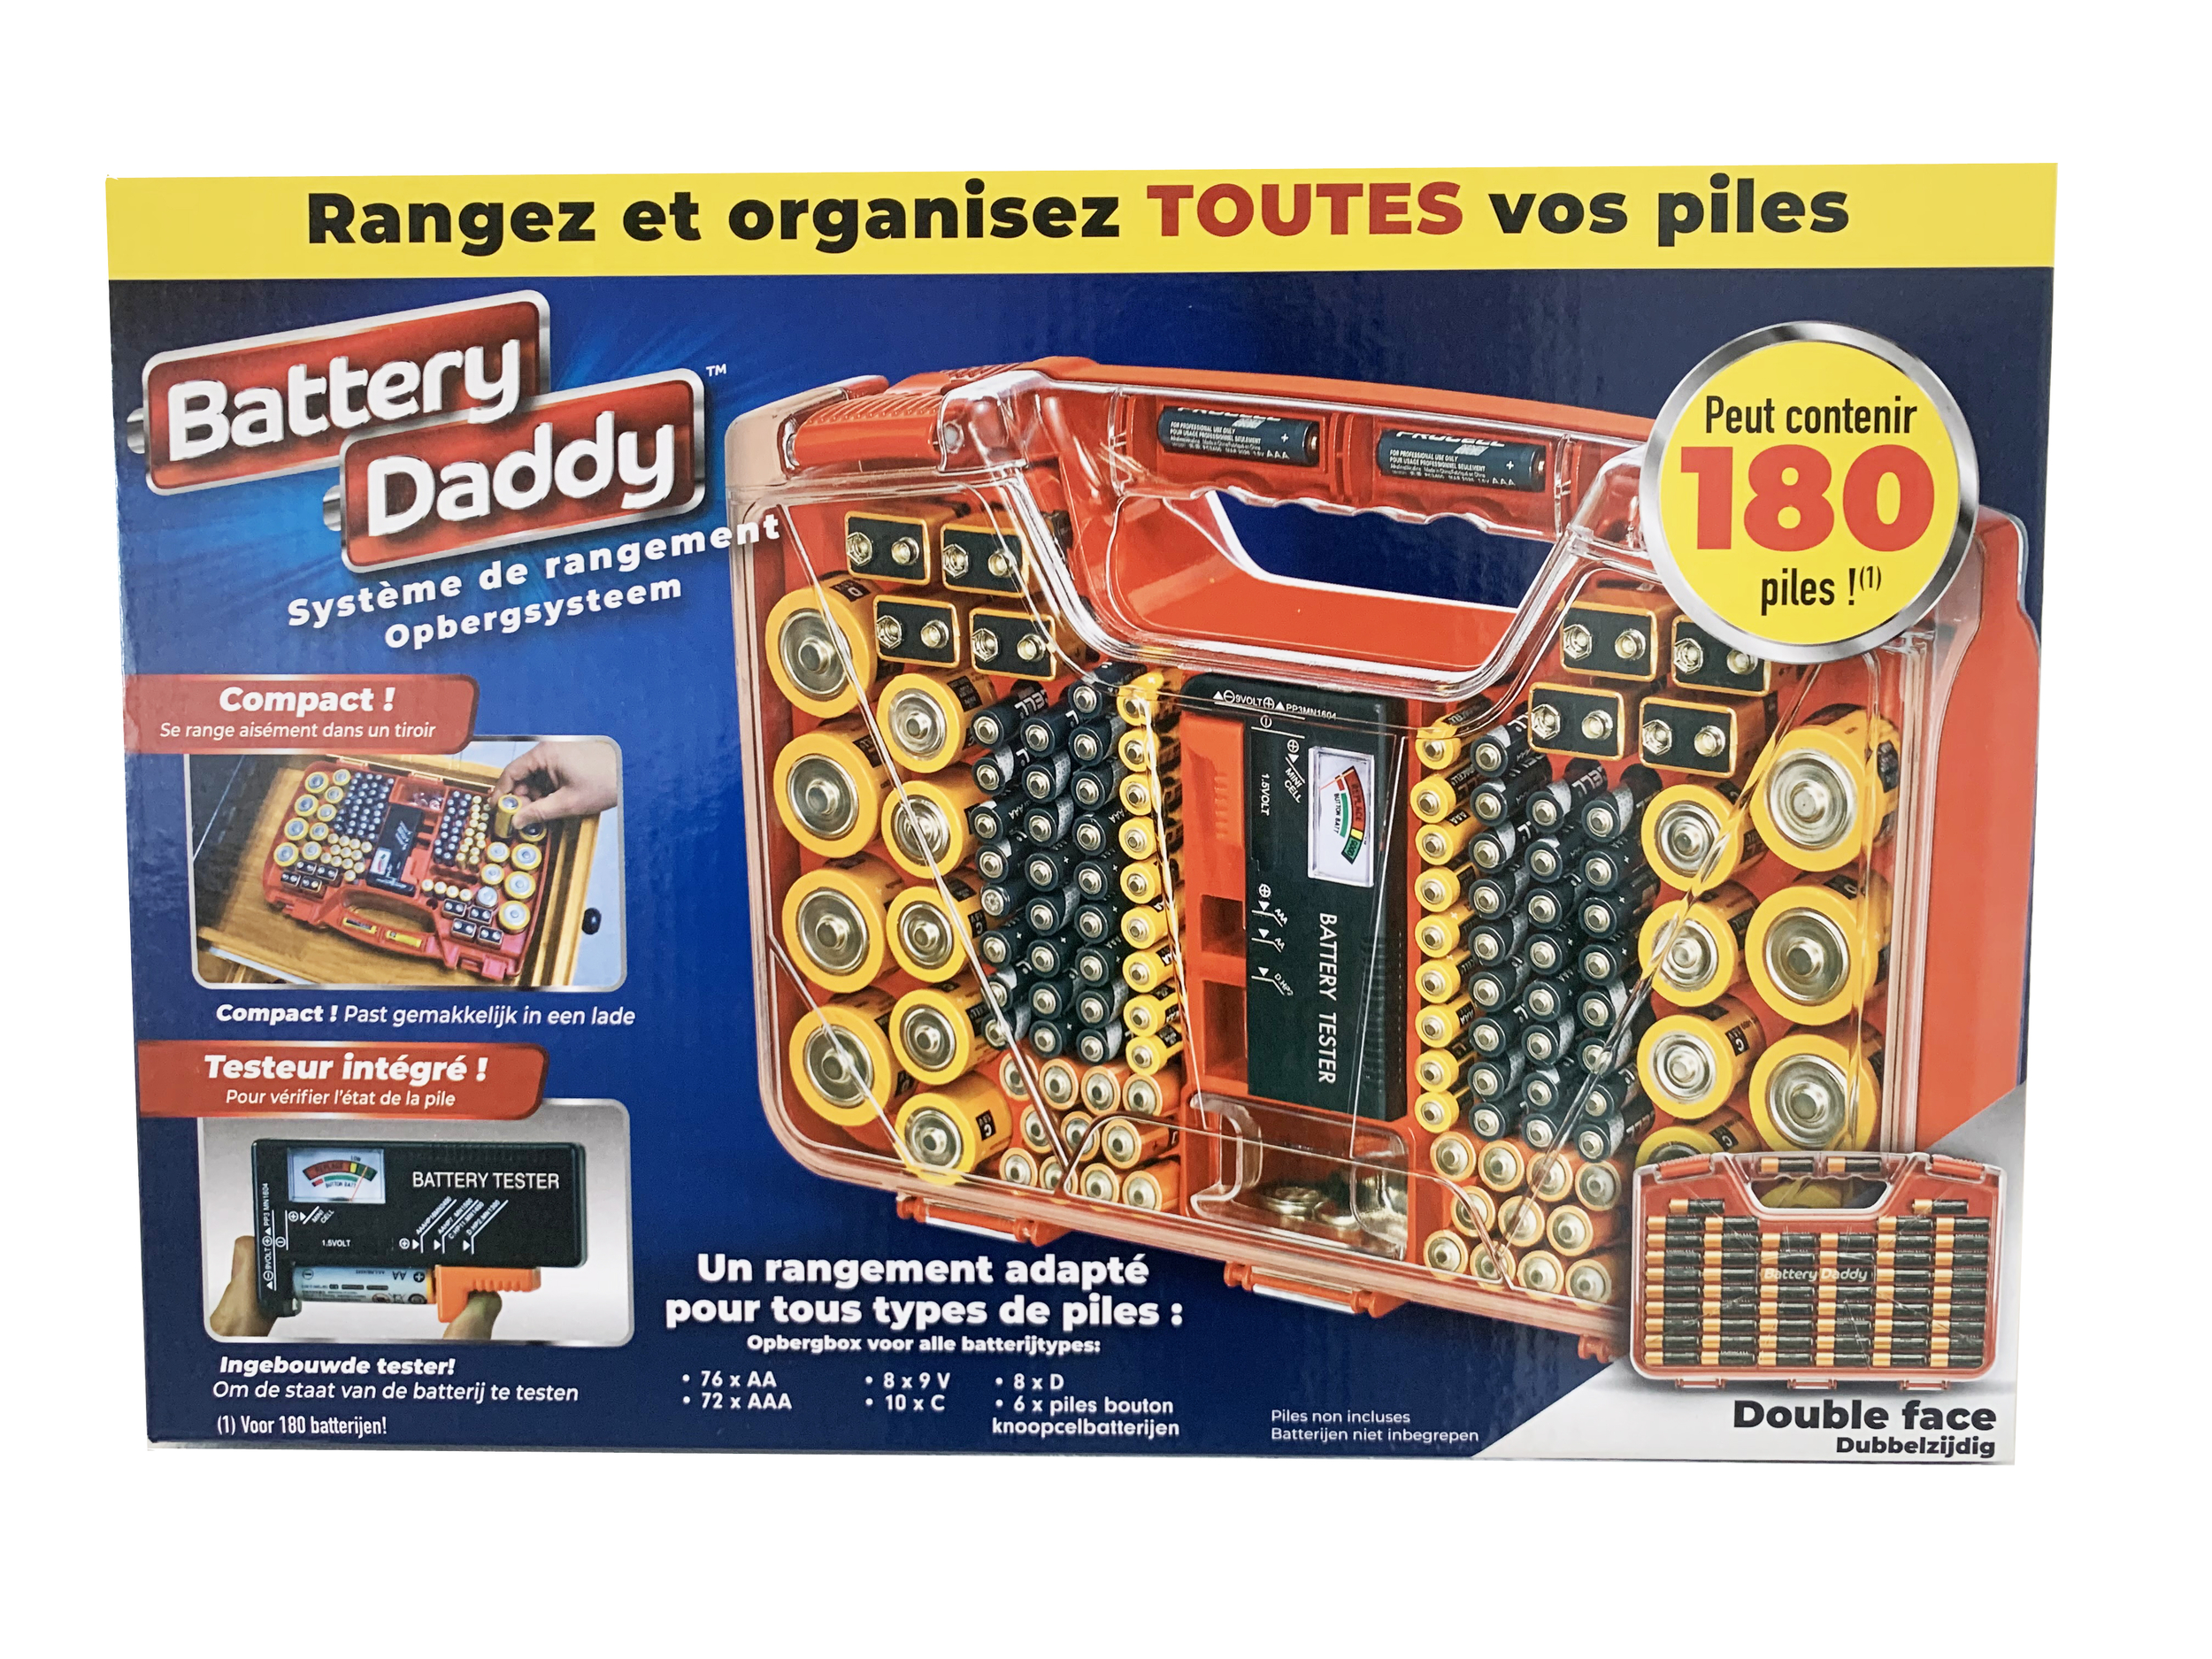 Battery daddy solupiles compact avec poignee de transport